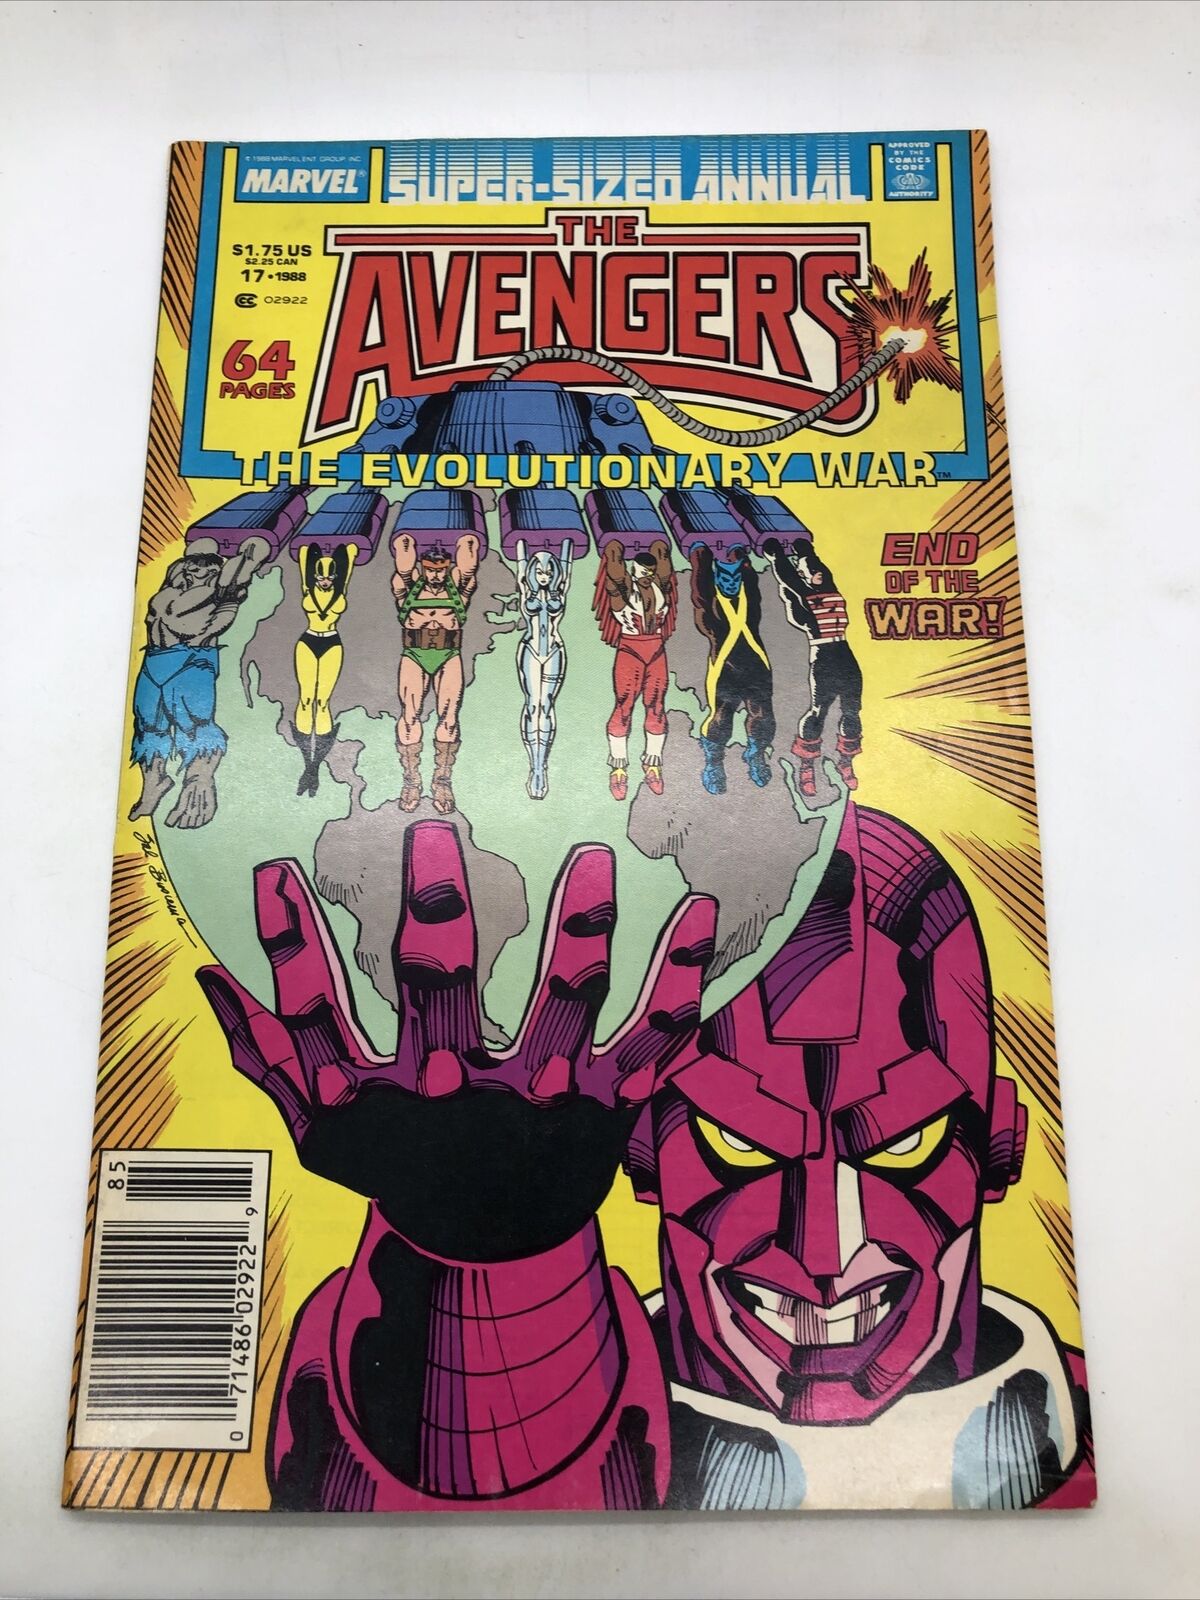 Marvel Comics The Avengers Annual Giant Size The Evolutionary War #17 1988